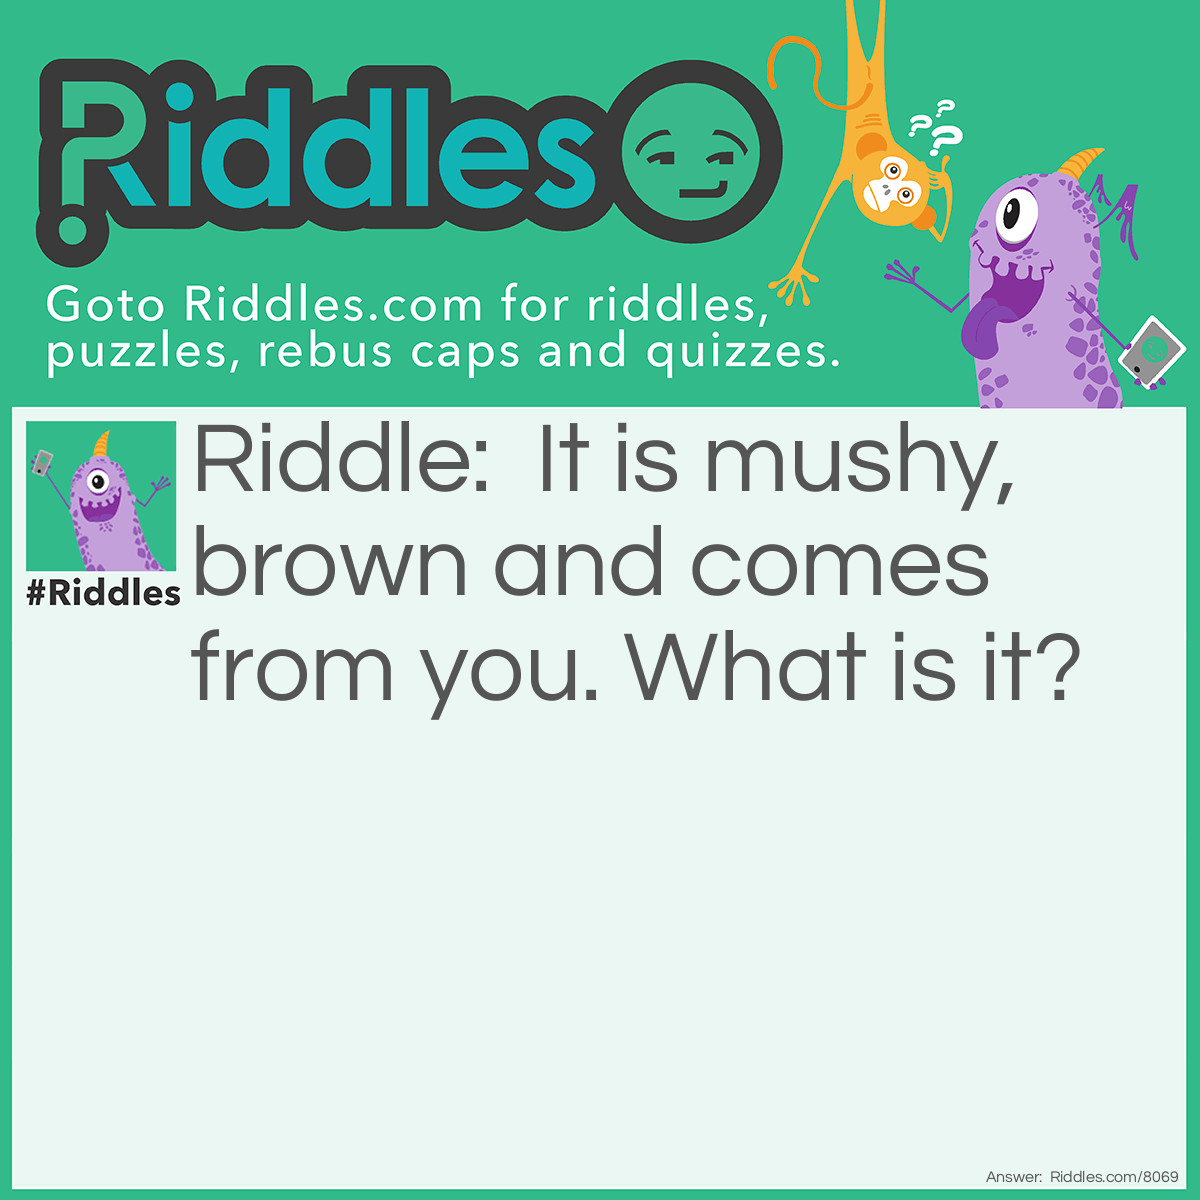 Riddle: It is mushy, brown and comes from you. What is it? Answer: A clump of mushy brown hair.